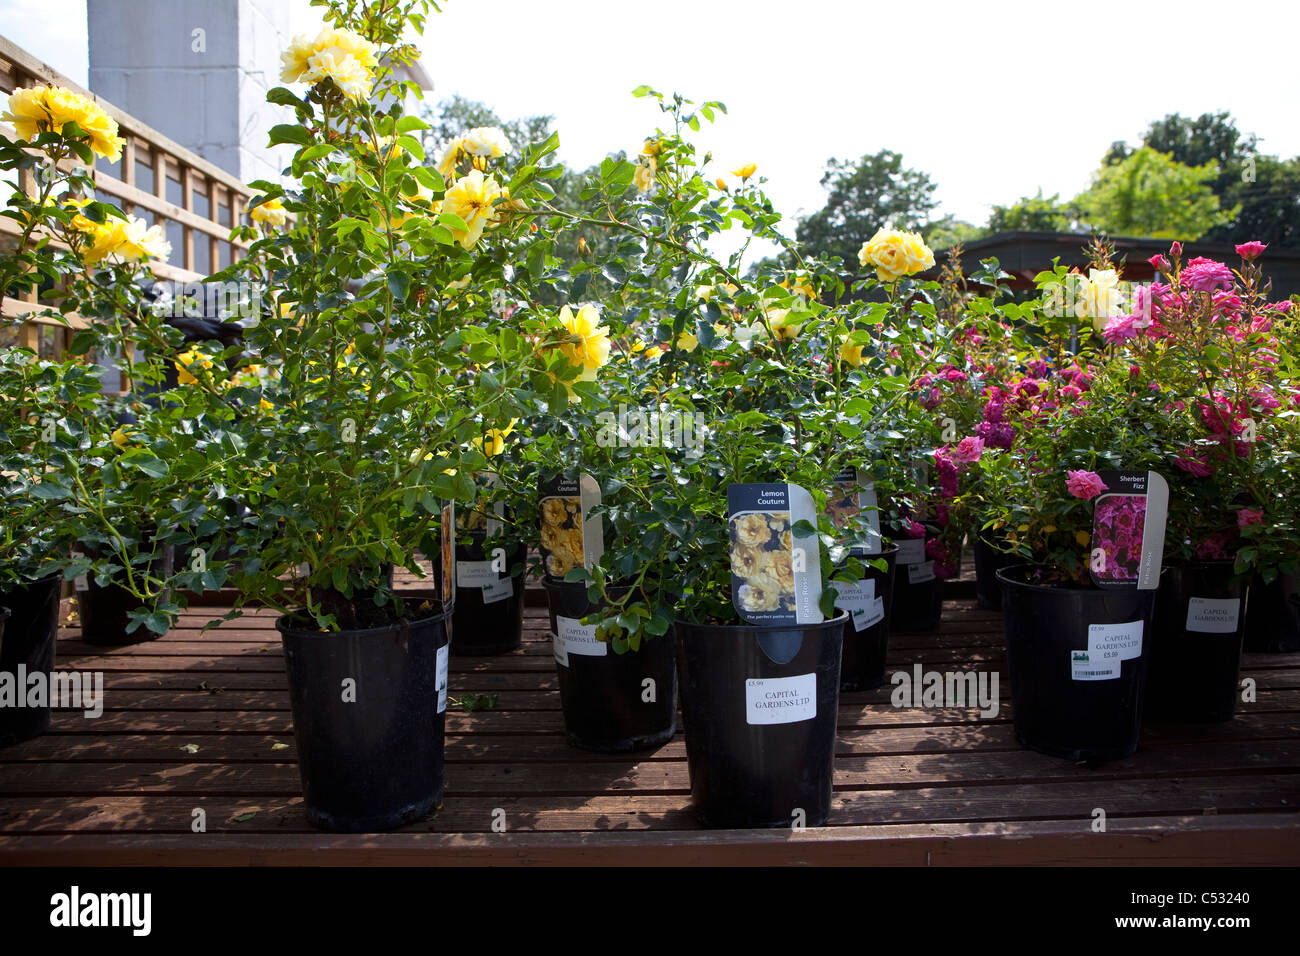 'Lemon Couture' Roses for sale at Garden Centre Stock Photo